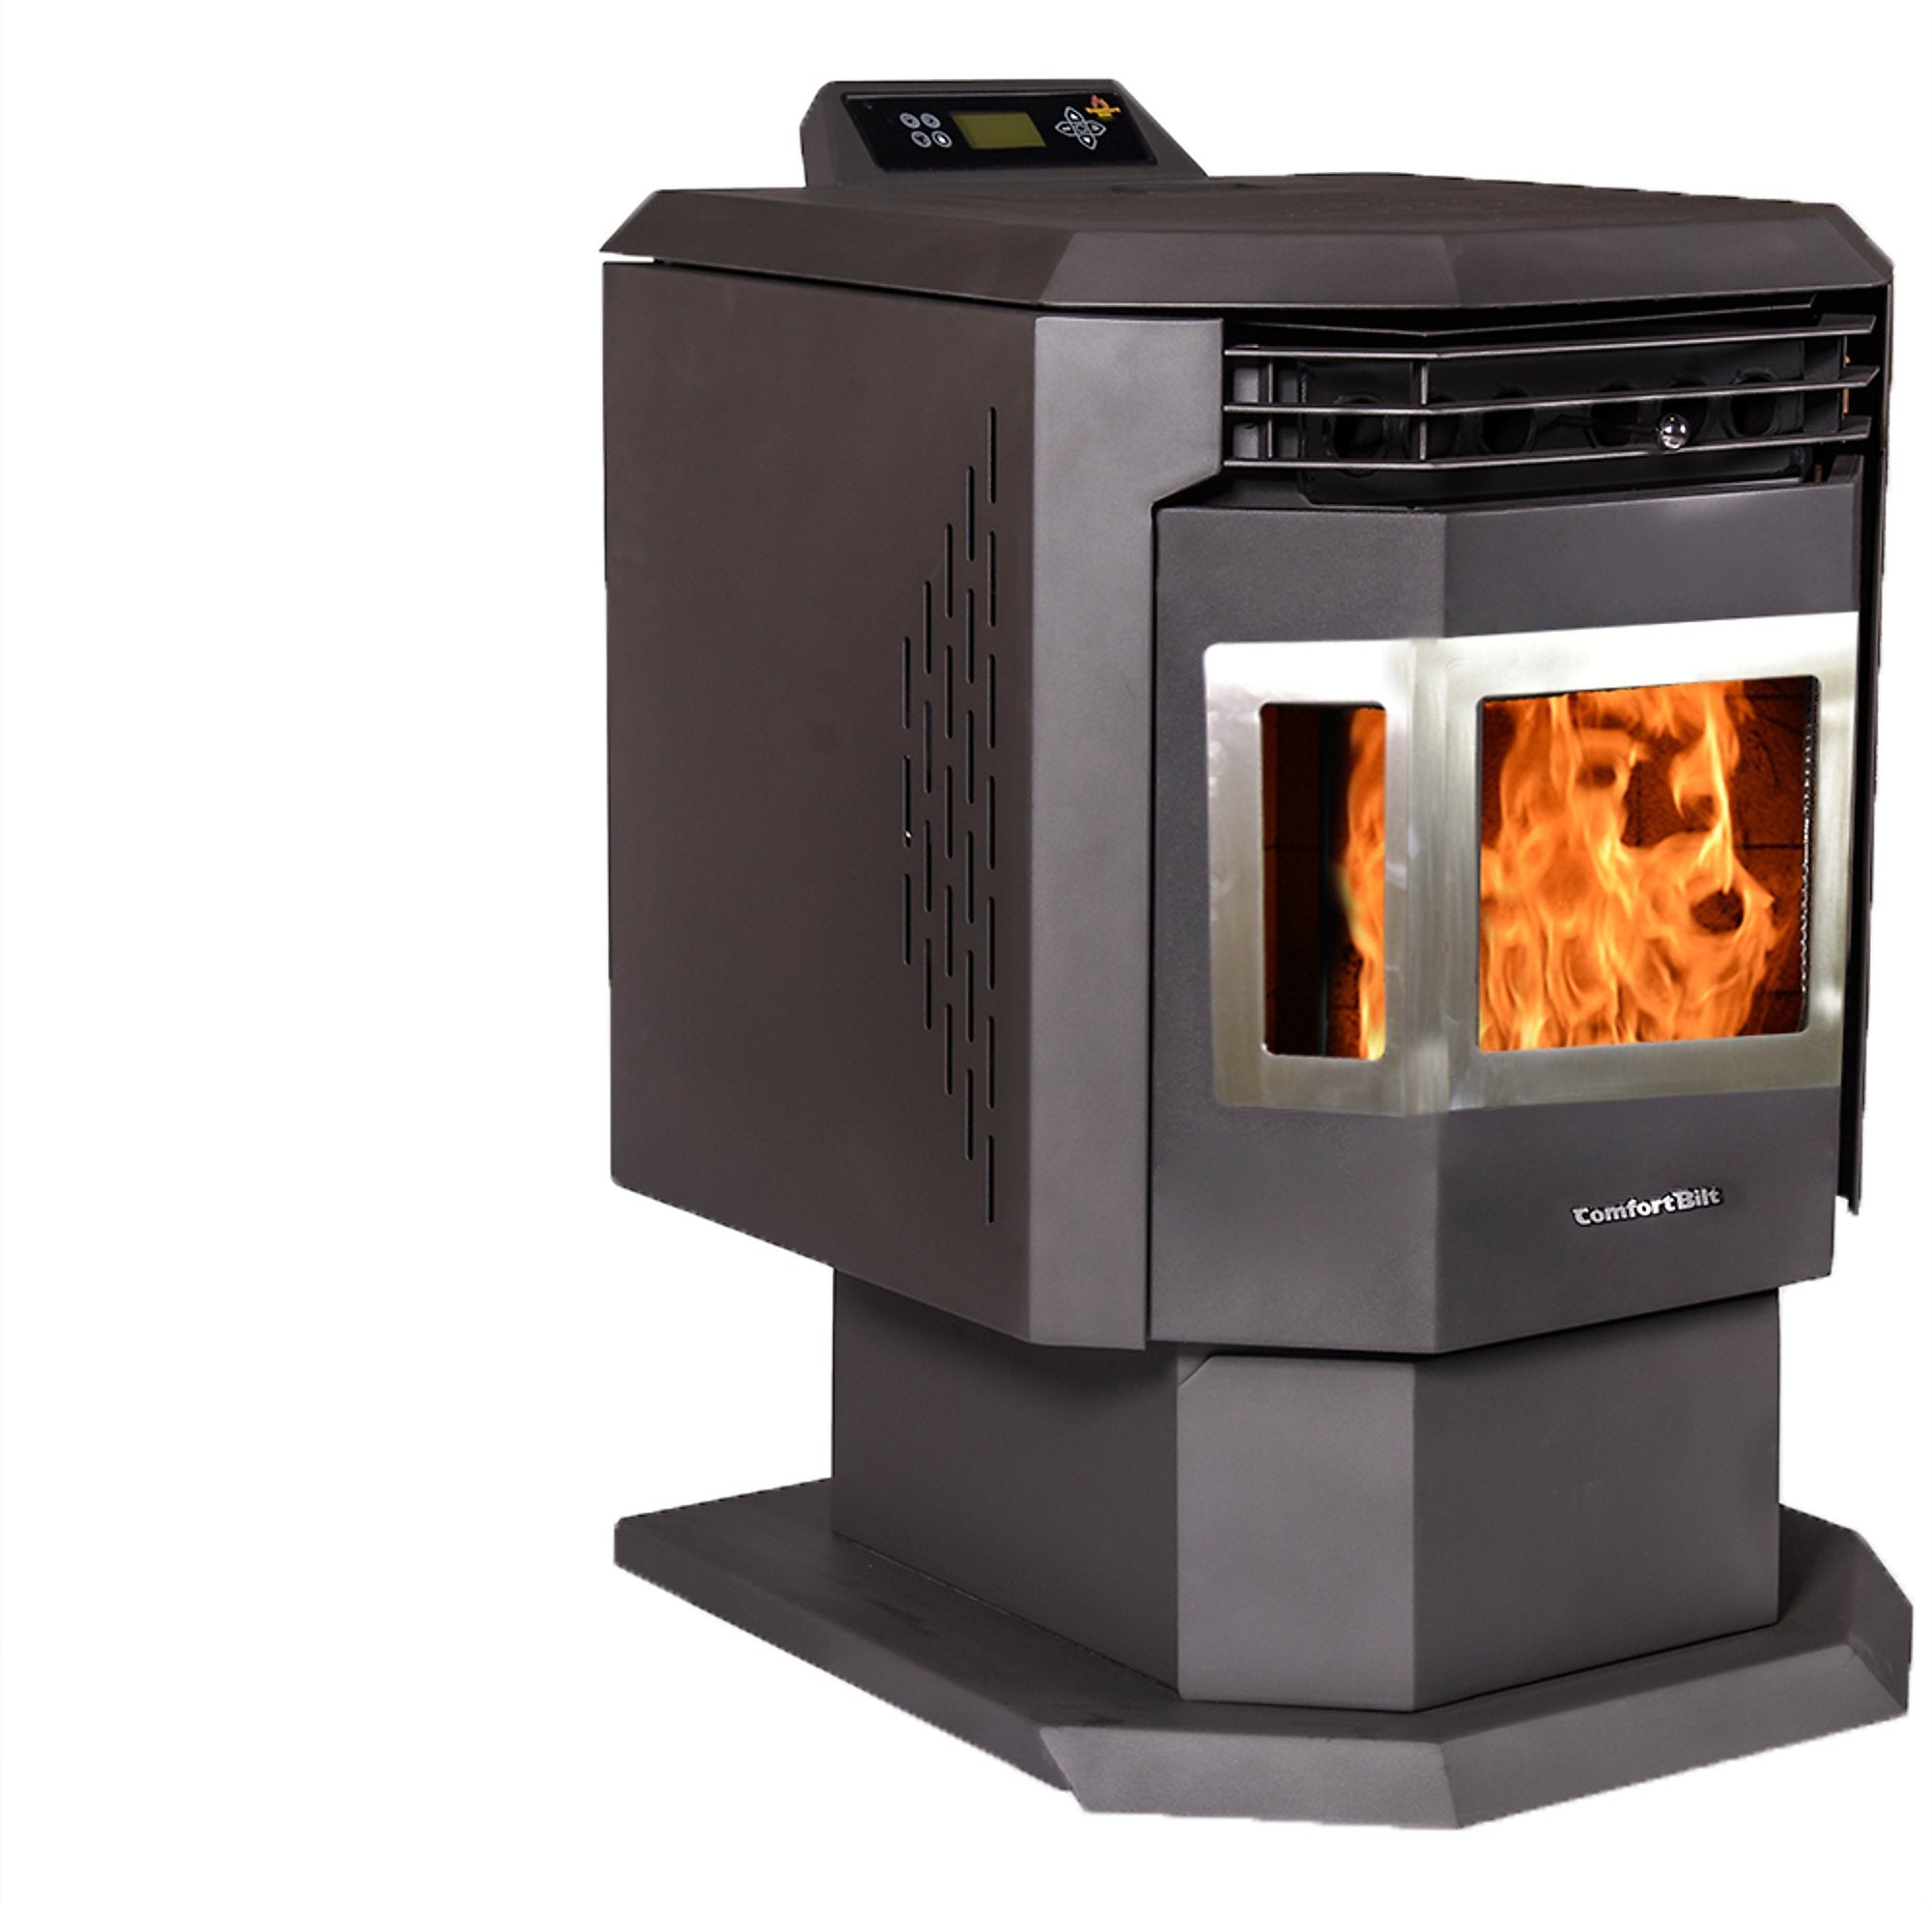 ComfortBilt, ComfortBilt HP21-SS 2,400 sq. ft. EPA Certified Pellet Stove with Auto Ignition Stainless Steel Trim New